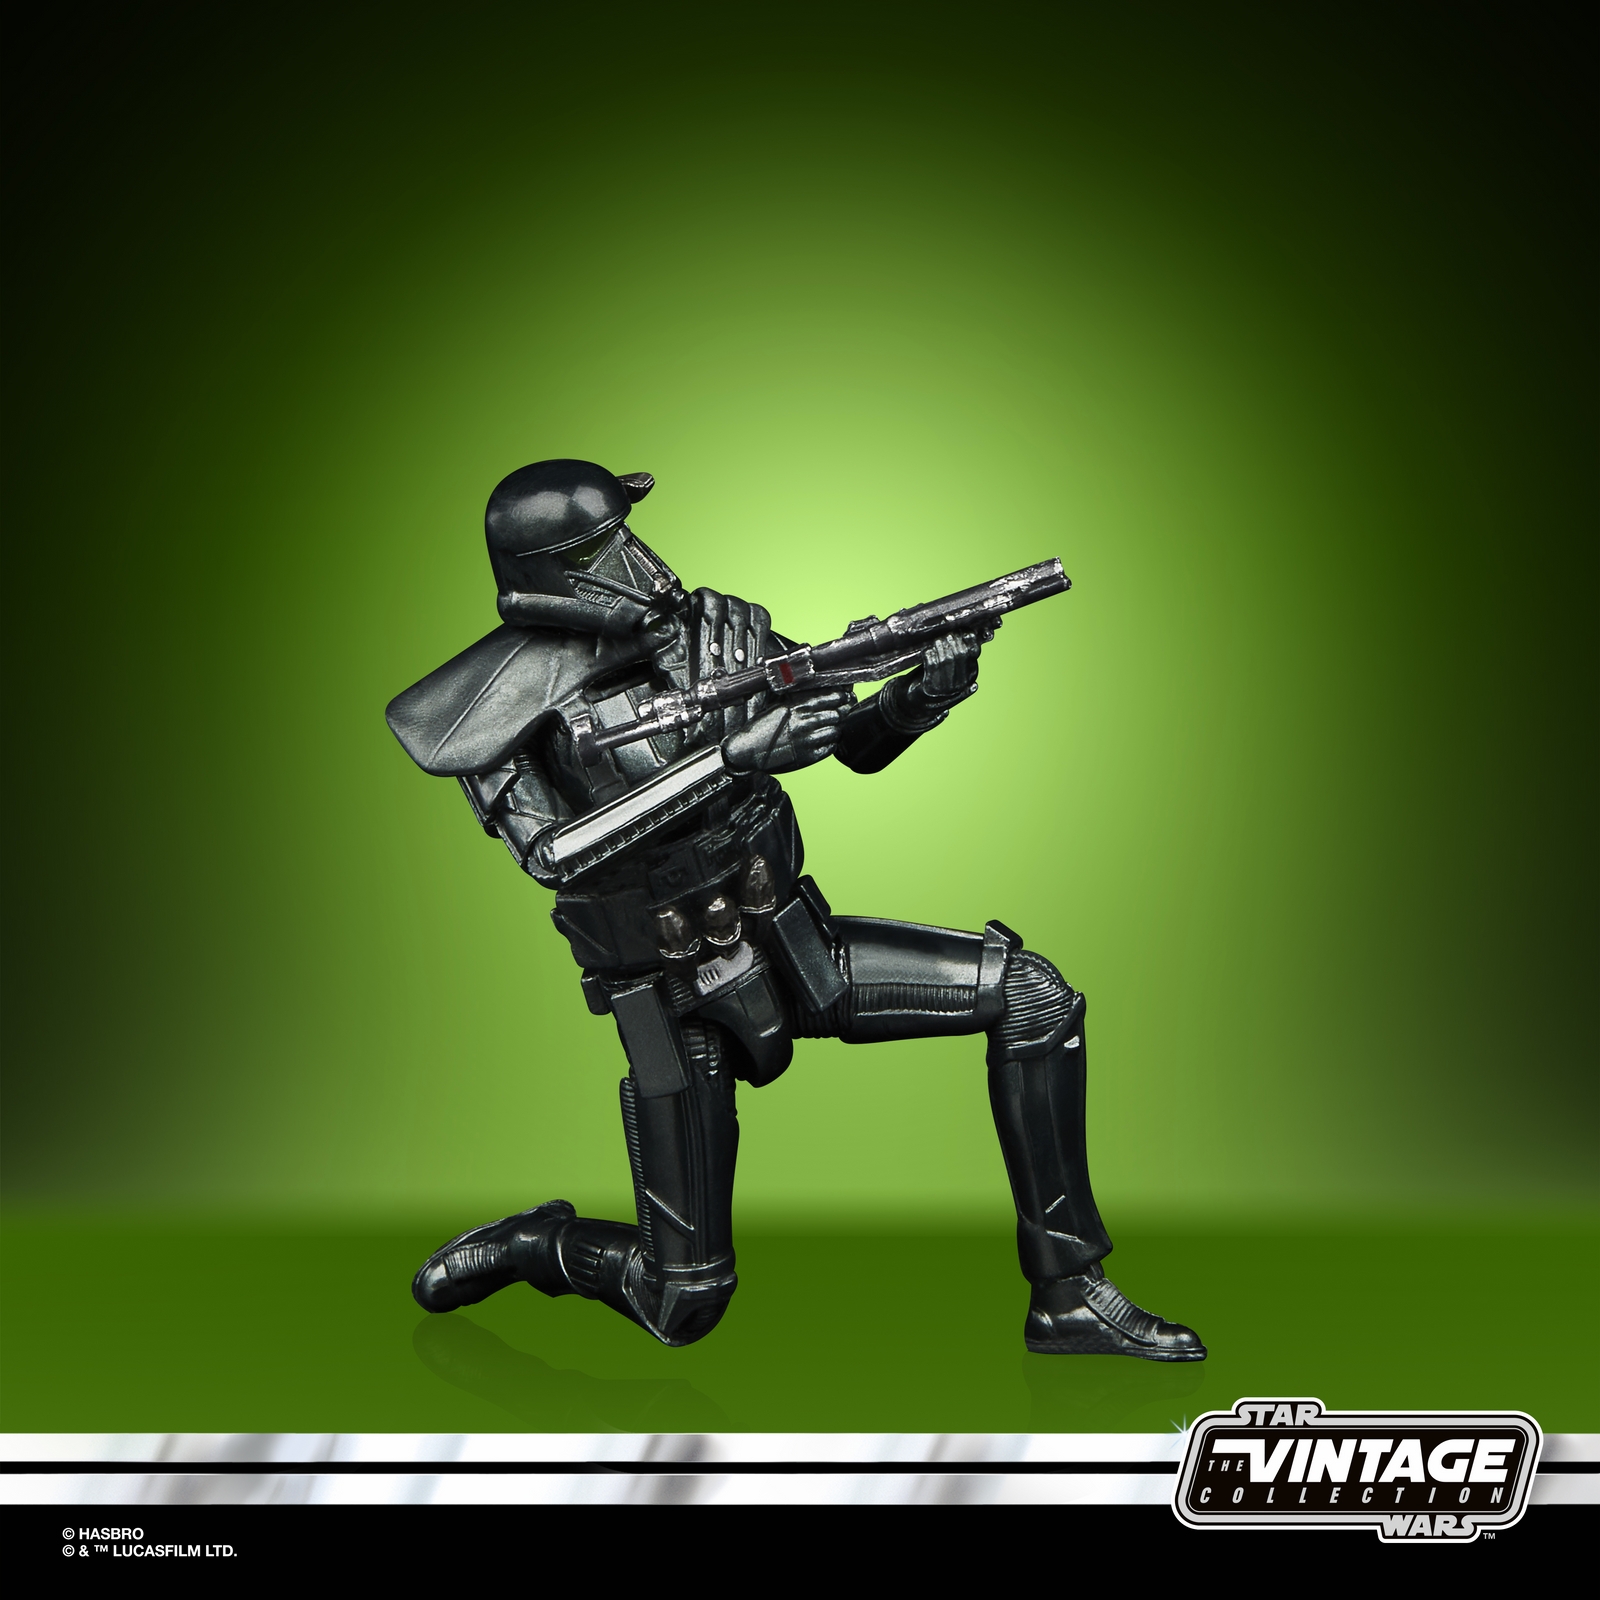 STAR WARS THE VINTAGE COLLECTION CARBONIZED COLLECTION 3.75-INCH DEATH TROOPER - oop5.jpg